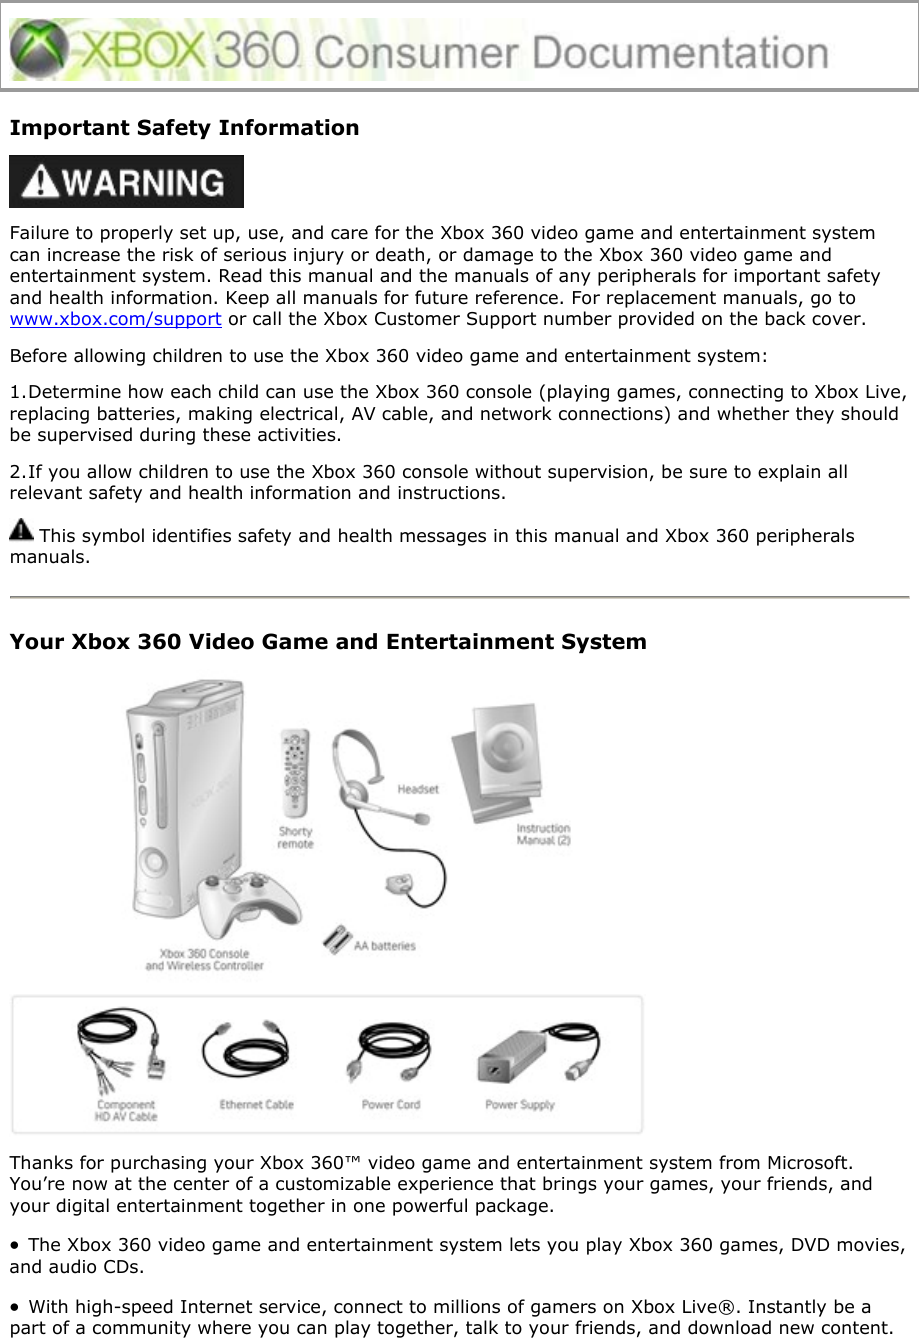 Important Safety Information  Failure to properly set up, use, and care for the Xbox 360 video game and entertainment system can increase the risk of serious injury or death, or damage to the Xbox 360 video game and entertainment system. Read this manual and the manuals of any peripherals for important safety and health information. Keep all manuals for future reference. For replacement manuals, go to www.xbox.com/support or call the Xbox Customer Support number provided on the back cover. Before allowing children to use the Xbox 360 video game and entertainment system: 1. Determine how each child can use the Xbox 360 console (playing games, connecting to Xbox Live, replacing batteries, making electrical, AV cable, and network connections) and whether they should be supervised during these activities.  2. If you allow children to use the Xbox 360 console without supervision, be sure to explain all relevant safety and health information and instructions.  This symbol identifies safety and health messages in this manual and Xbox 360 peripherals manuals.  Your Xbox 360 Video Game and Entertainment System  Thanks for purchasing your Xbox 360™ video game and entertainment system from Microsoft. You’re now at the center of a customizable experience that brings your games, your friends, and your digital entertainment together in one powerful package. • The Xbox 360 video game and entertainment system lets you play Xbox 360 games, DVD movies, and audio CDs.  • With high-speed Internet service, connect to millions of gamers on Xbox Live®. Instantly be a part of a community where you can play together, talk to your friends, and download new content. 